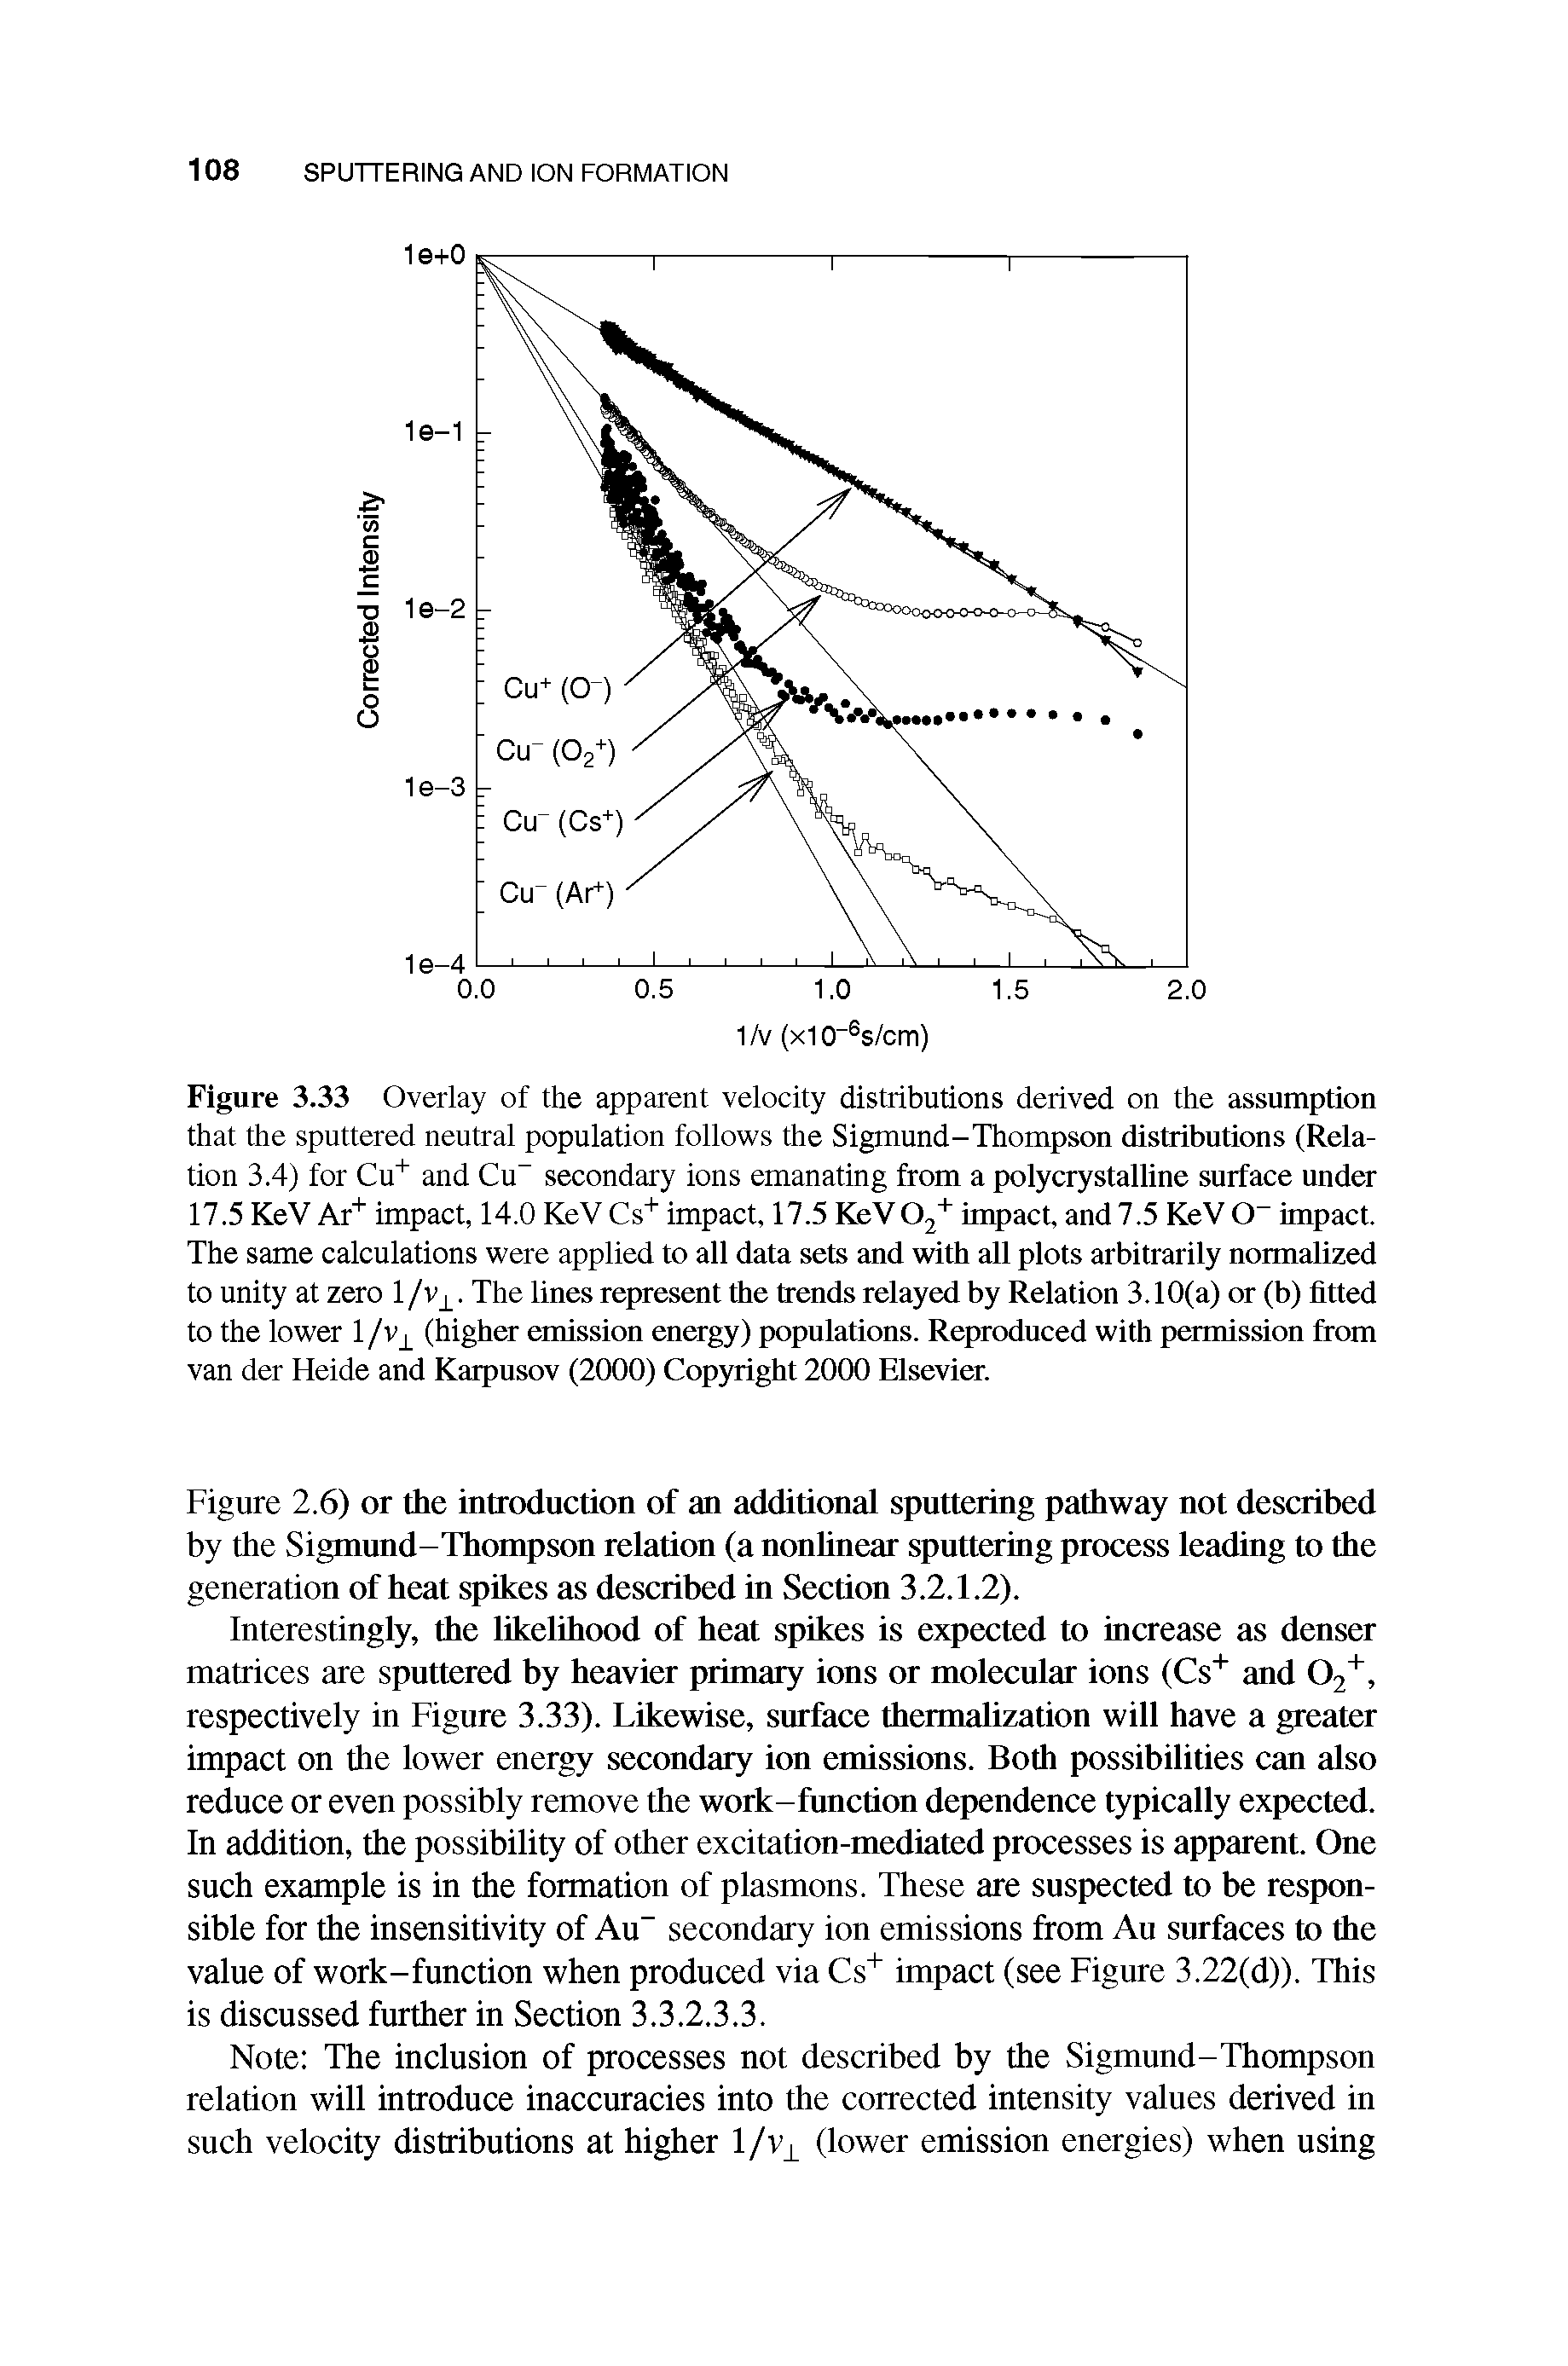 Figure 3.33 Overlay of the apparent velocity distributions derived on the assumption that the sputtered neutral population follows the Sigmund-Thompson distributions (Relation 3.4) for Cu" and Cn secondary ions emanating from a polycrystalline surface under 17.5 KeV Ar" " impact, 14.0 KeV Cs" " impact, 17.5 KeV02 impact, and7.5 KeV0 impact. The same calculations were applied to all data sets and with all plots arbitrarily normalized to unity at zero 1 jv. The lines represent the trends relayed by Relation 3.10(a) or (b) fitted to the lower 1 (higher emission energy) populations. Reproduced with permission from van der Heide and Karpusov (2000) Cop)night 2000 Elsevier.